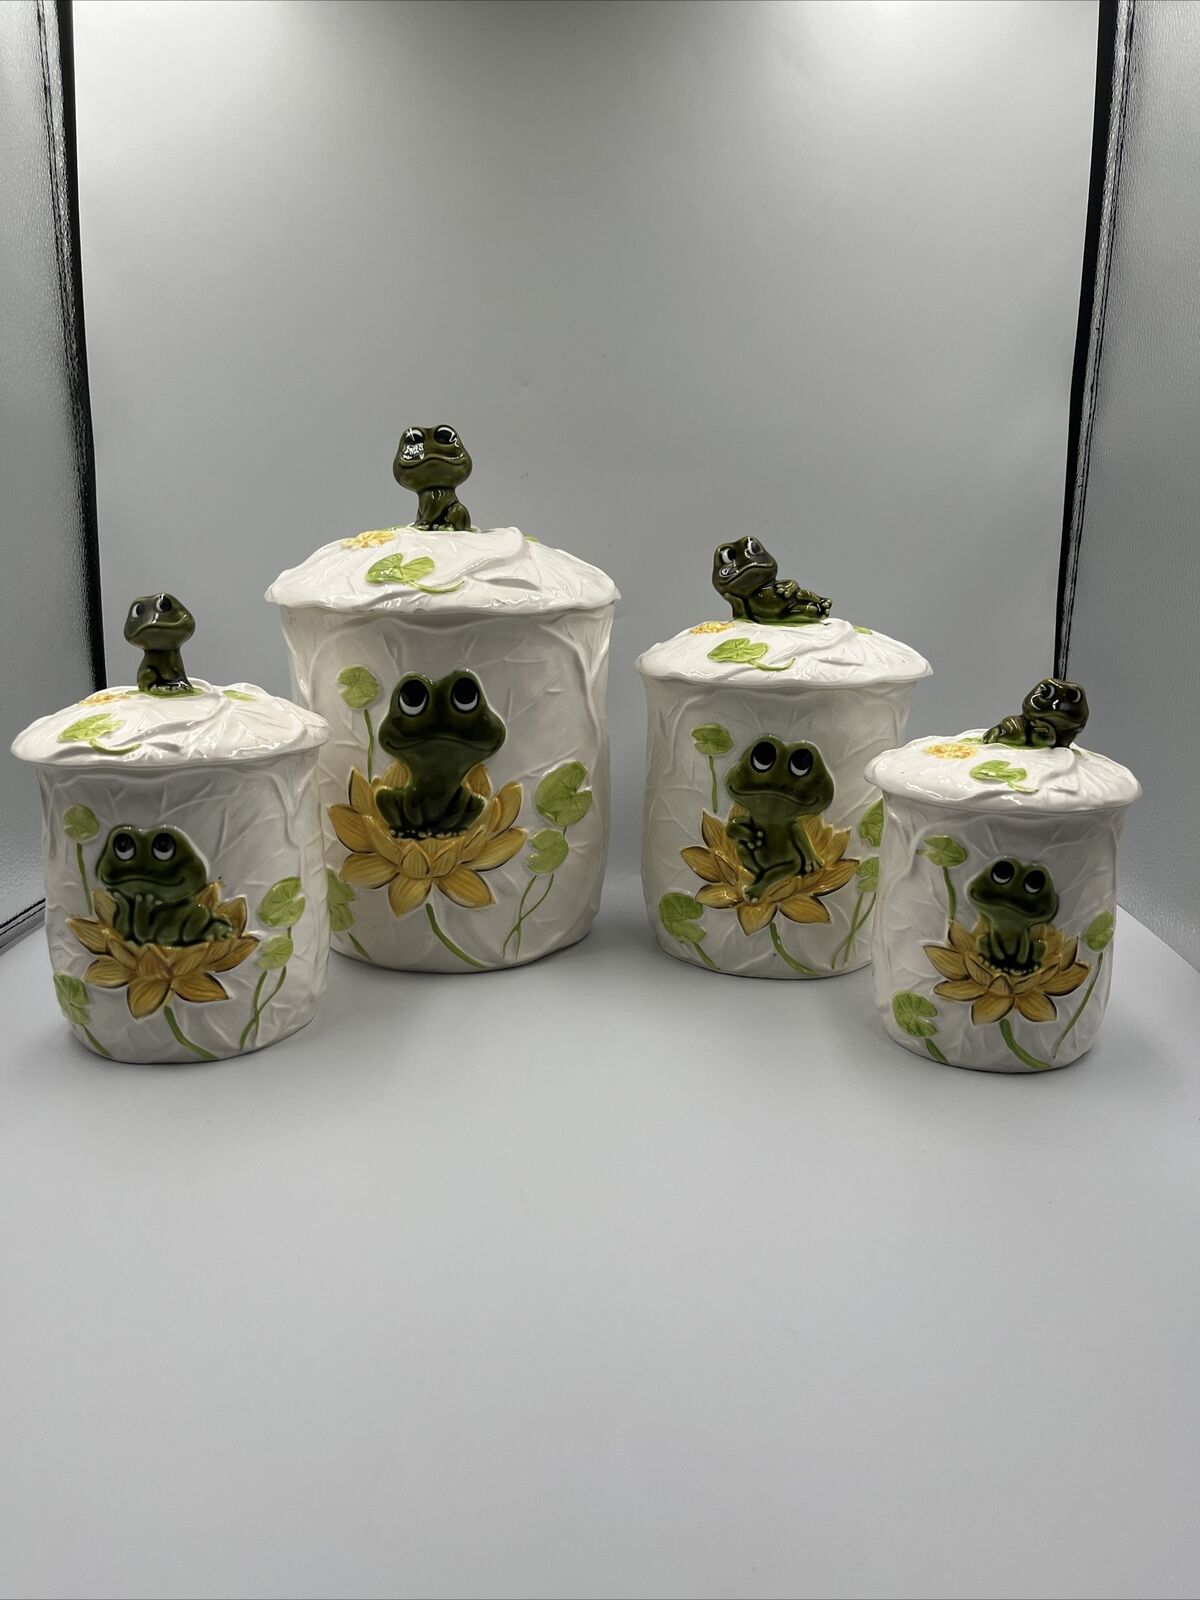 4 VINTAGE 1978 SEARS NEIL THE FROG CERAMIC KITCHEN CANISTERS + LIDS